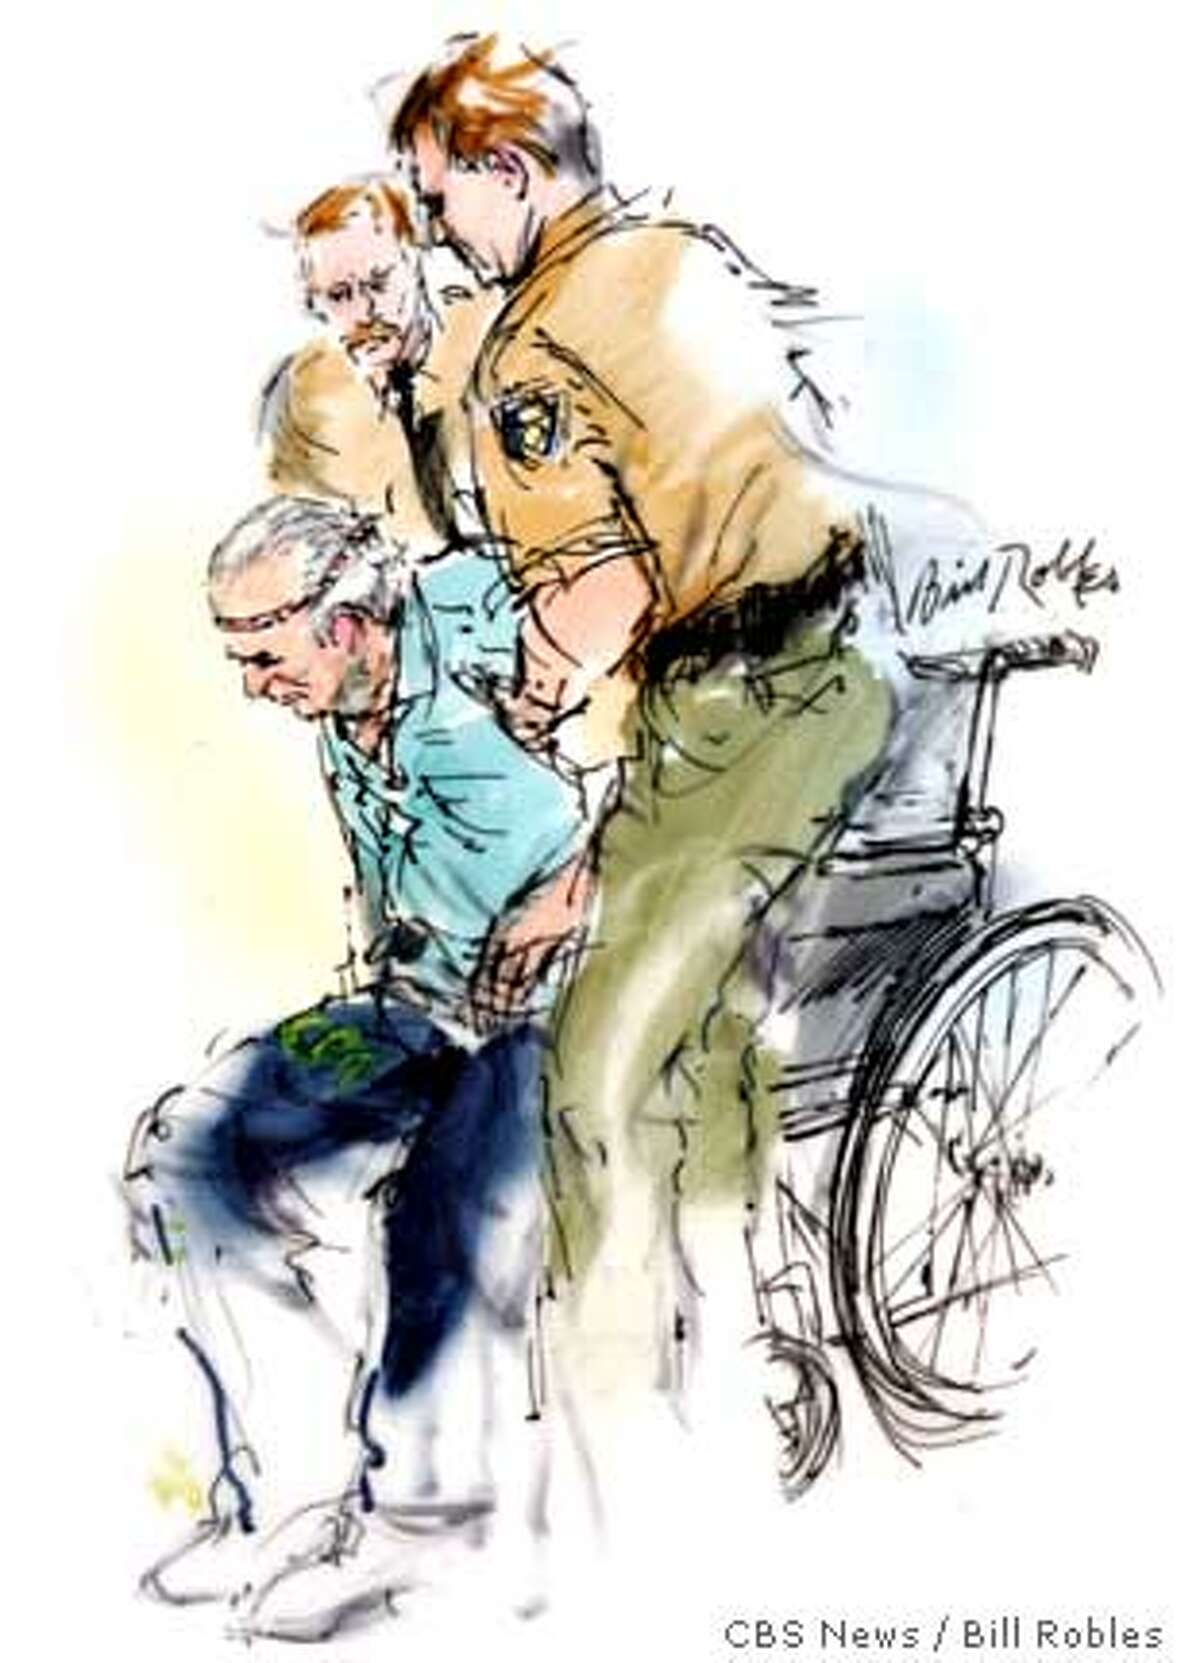 Artist drawing of Clarence Ray Allen being lifted by two San Quentin Prison guards before he was executed in San Quentin, Calif., Tuesday, Jan. 17, 2006. Allen, 76, ordered the slaying of three people at a Fresno, Calif., market while behind bars in 1980 for another murder. (AP Photo/Mandatory credit: Bill Robles for CBS News)